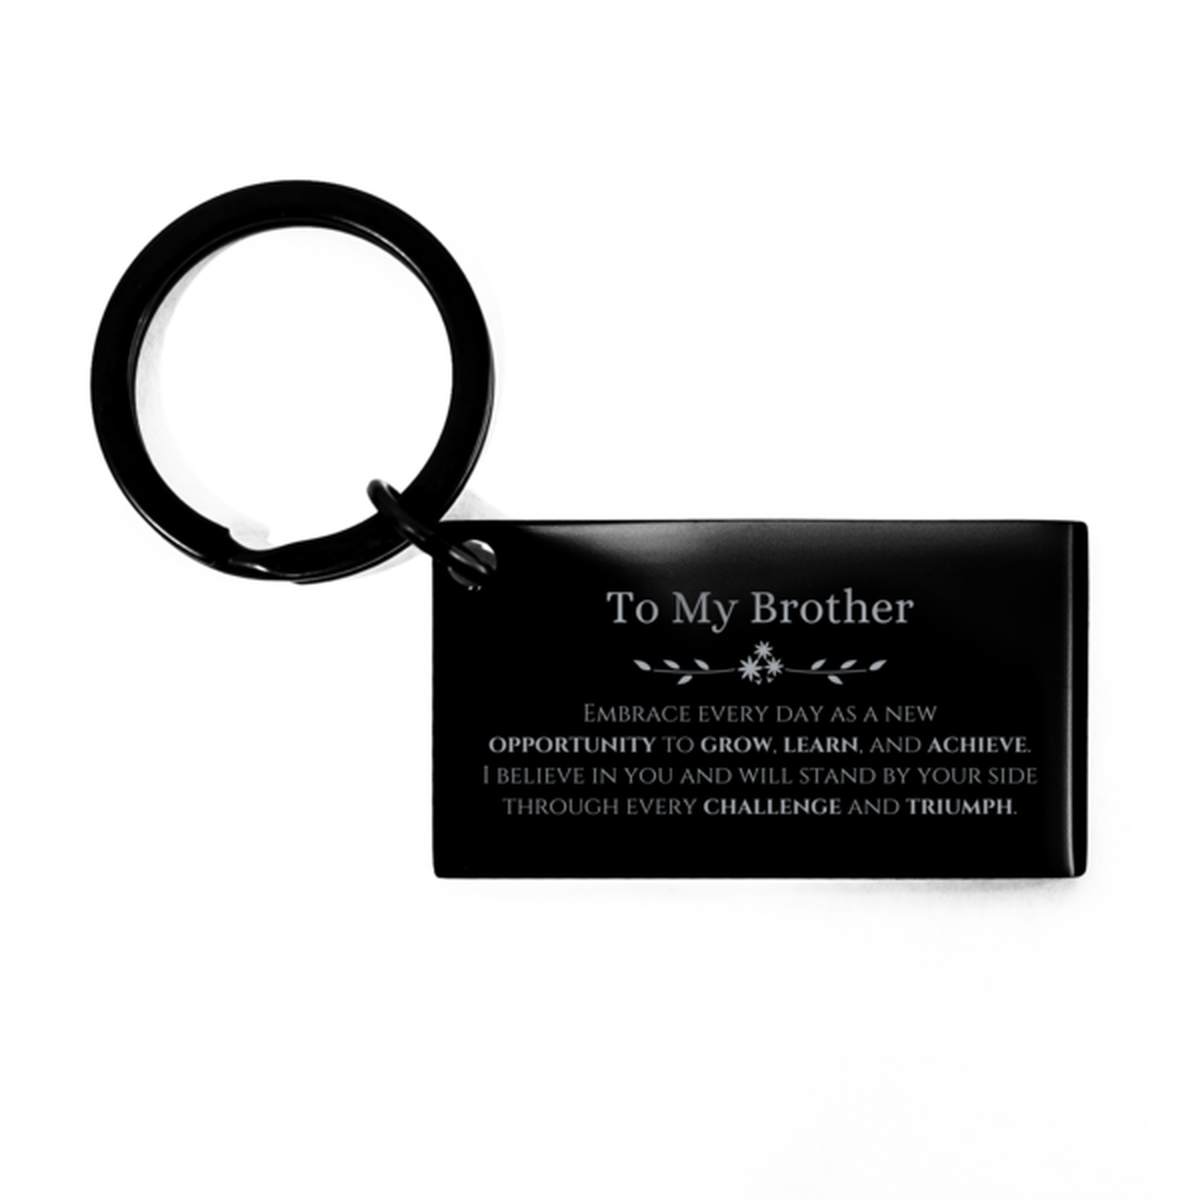 To My Brother Gifts, I believe in you and will stand by your side, Inspirational Keychain For Brother, Birthday Christmas Motivational Brother Gifts